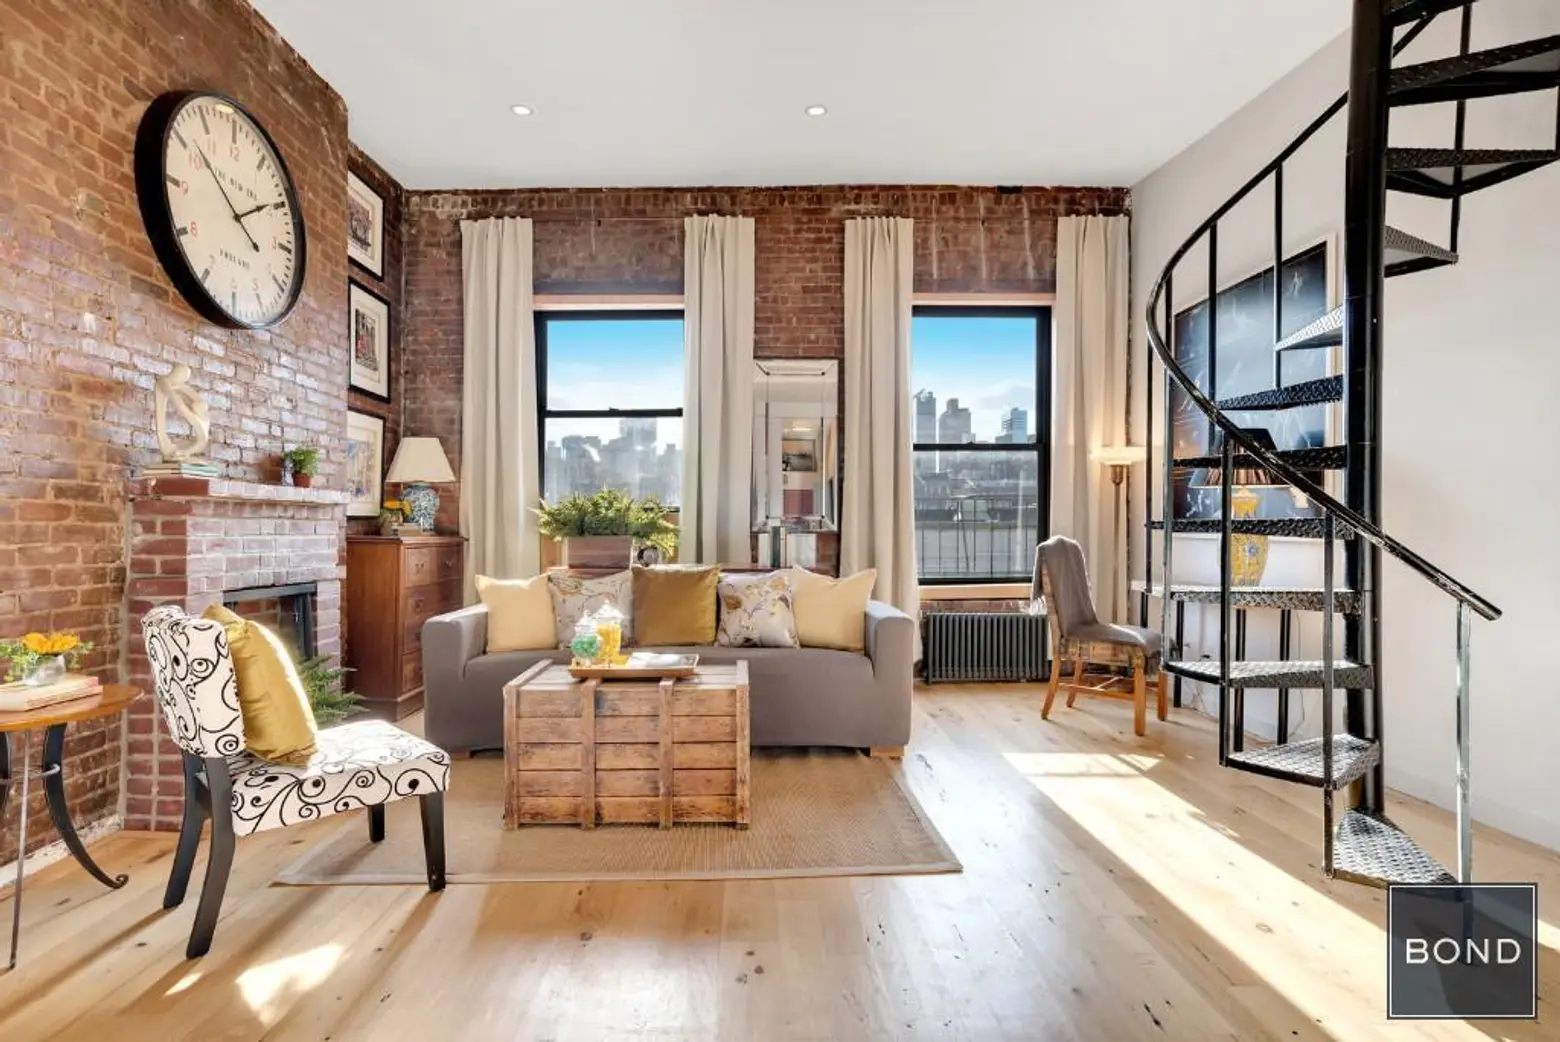 For $1.15M, this little Upper West Side condo has a private rooftop that’s almost twice its size